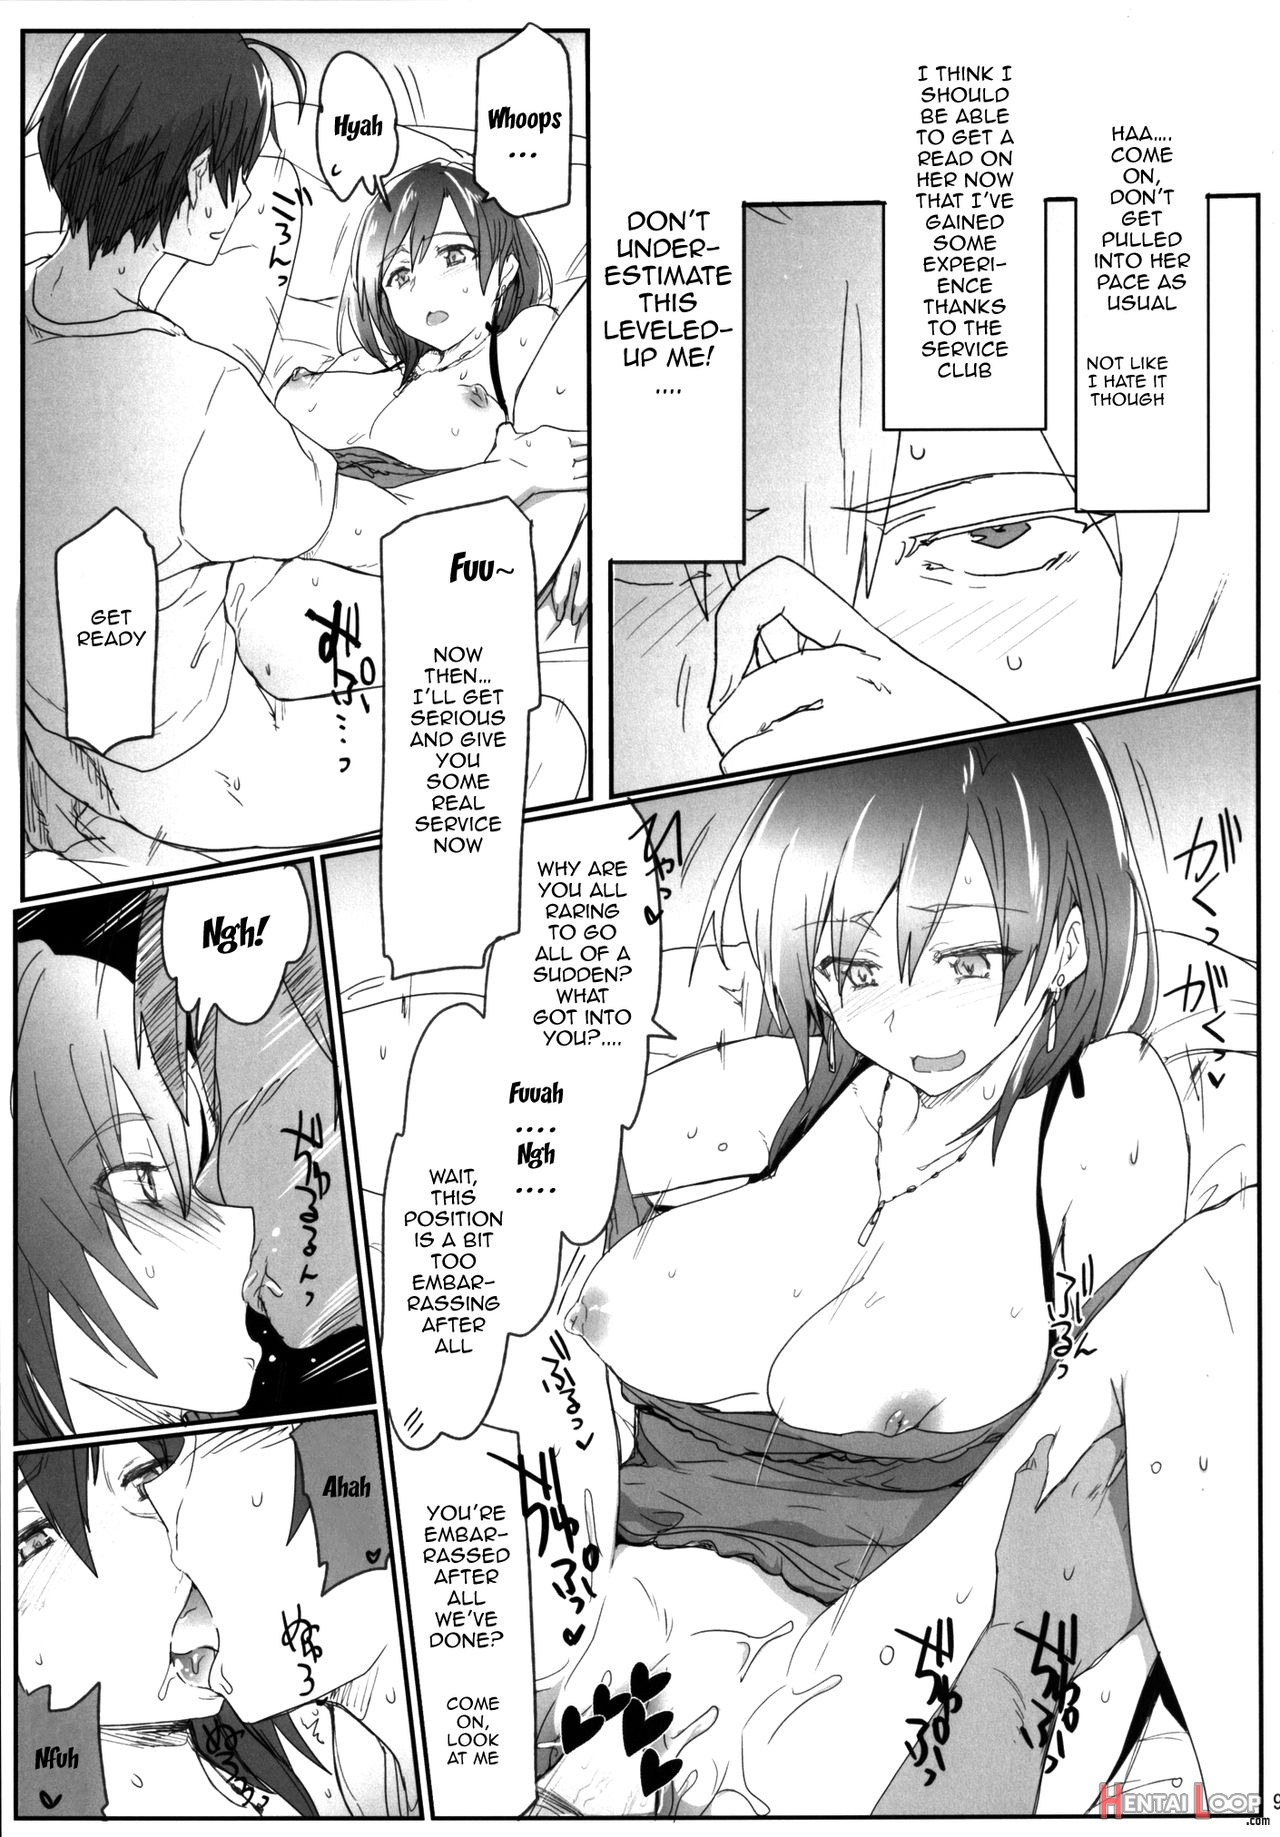 The Sexual Activities Of The Volunteer Club page 8